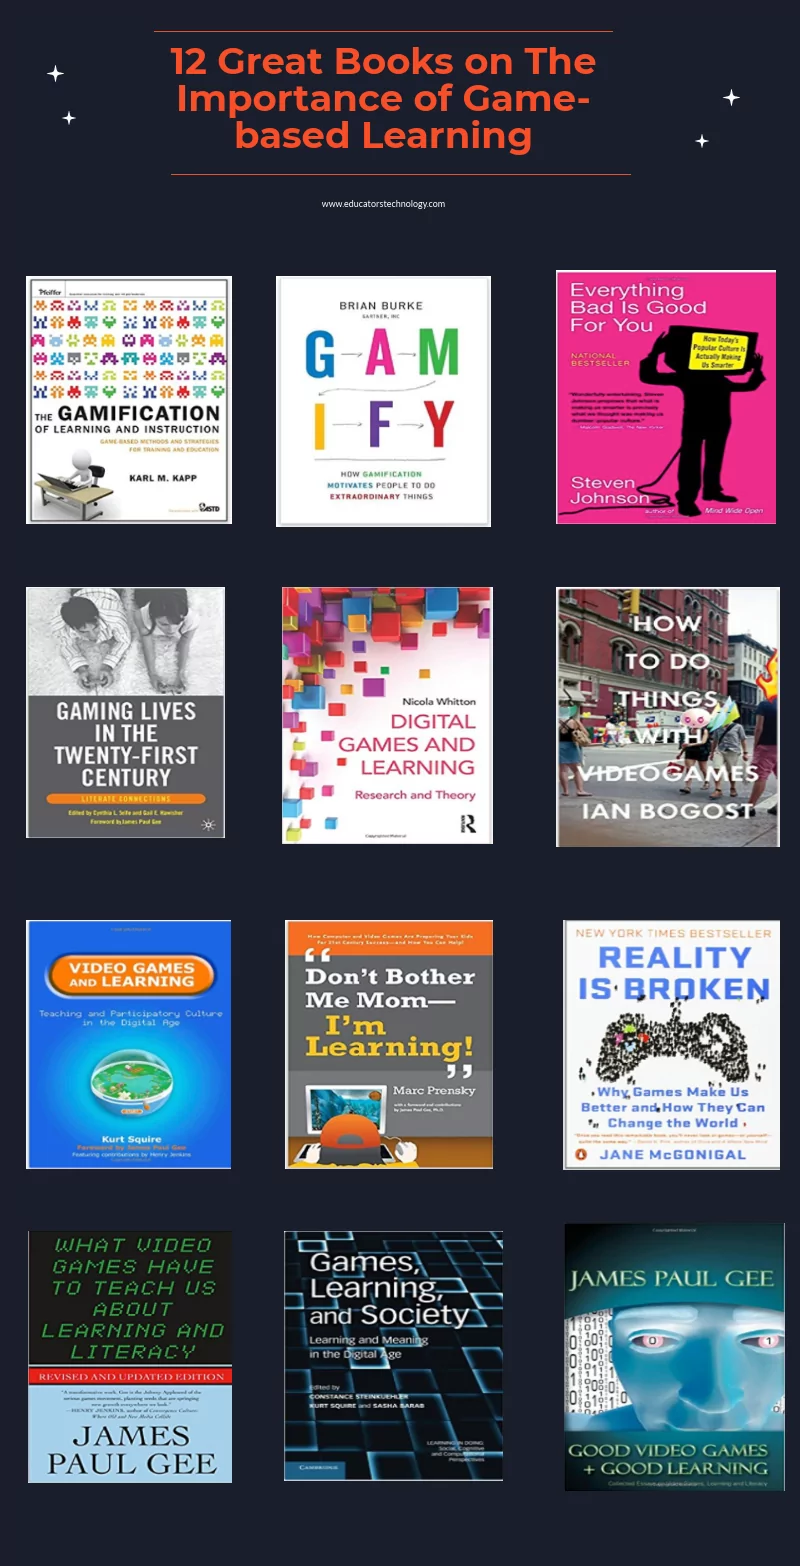 12 Great Books on The Importance of Game-based Learning